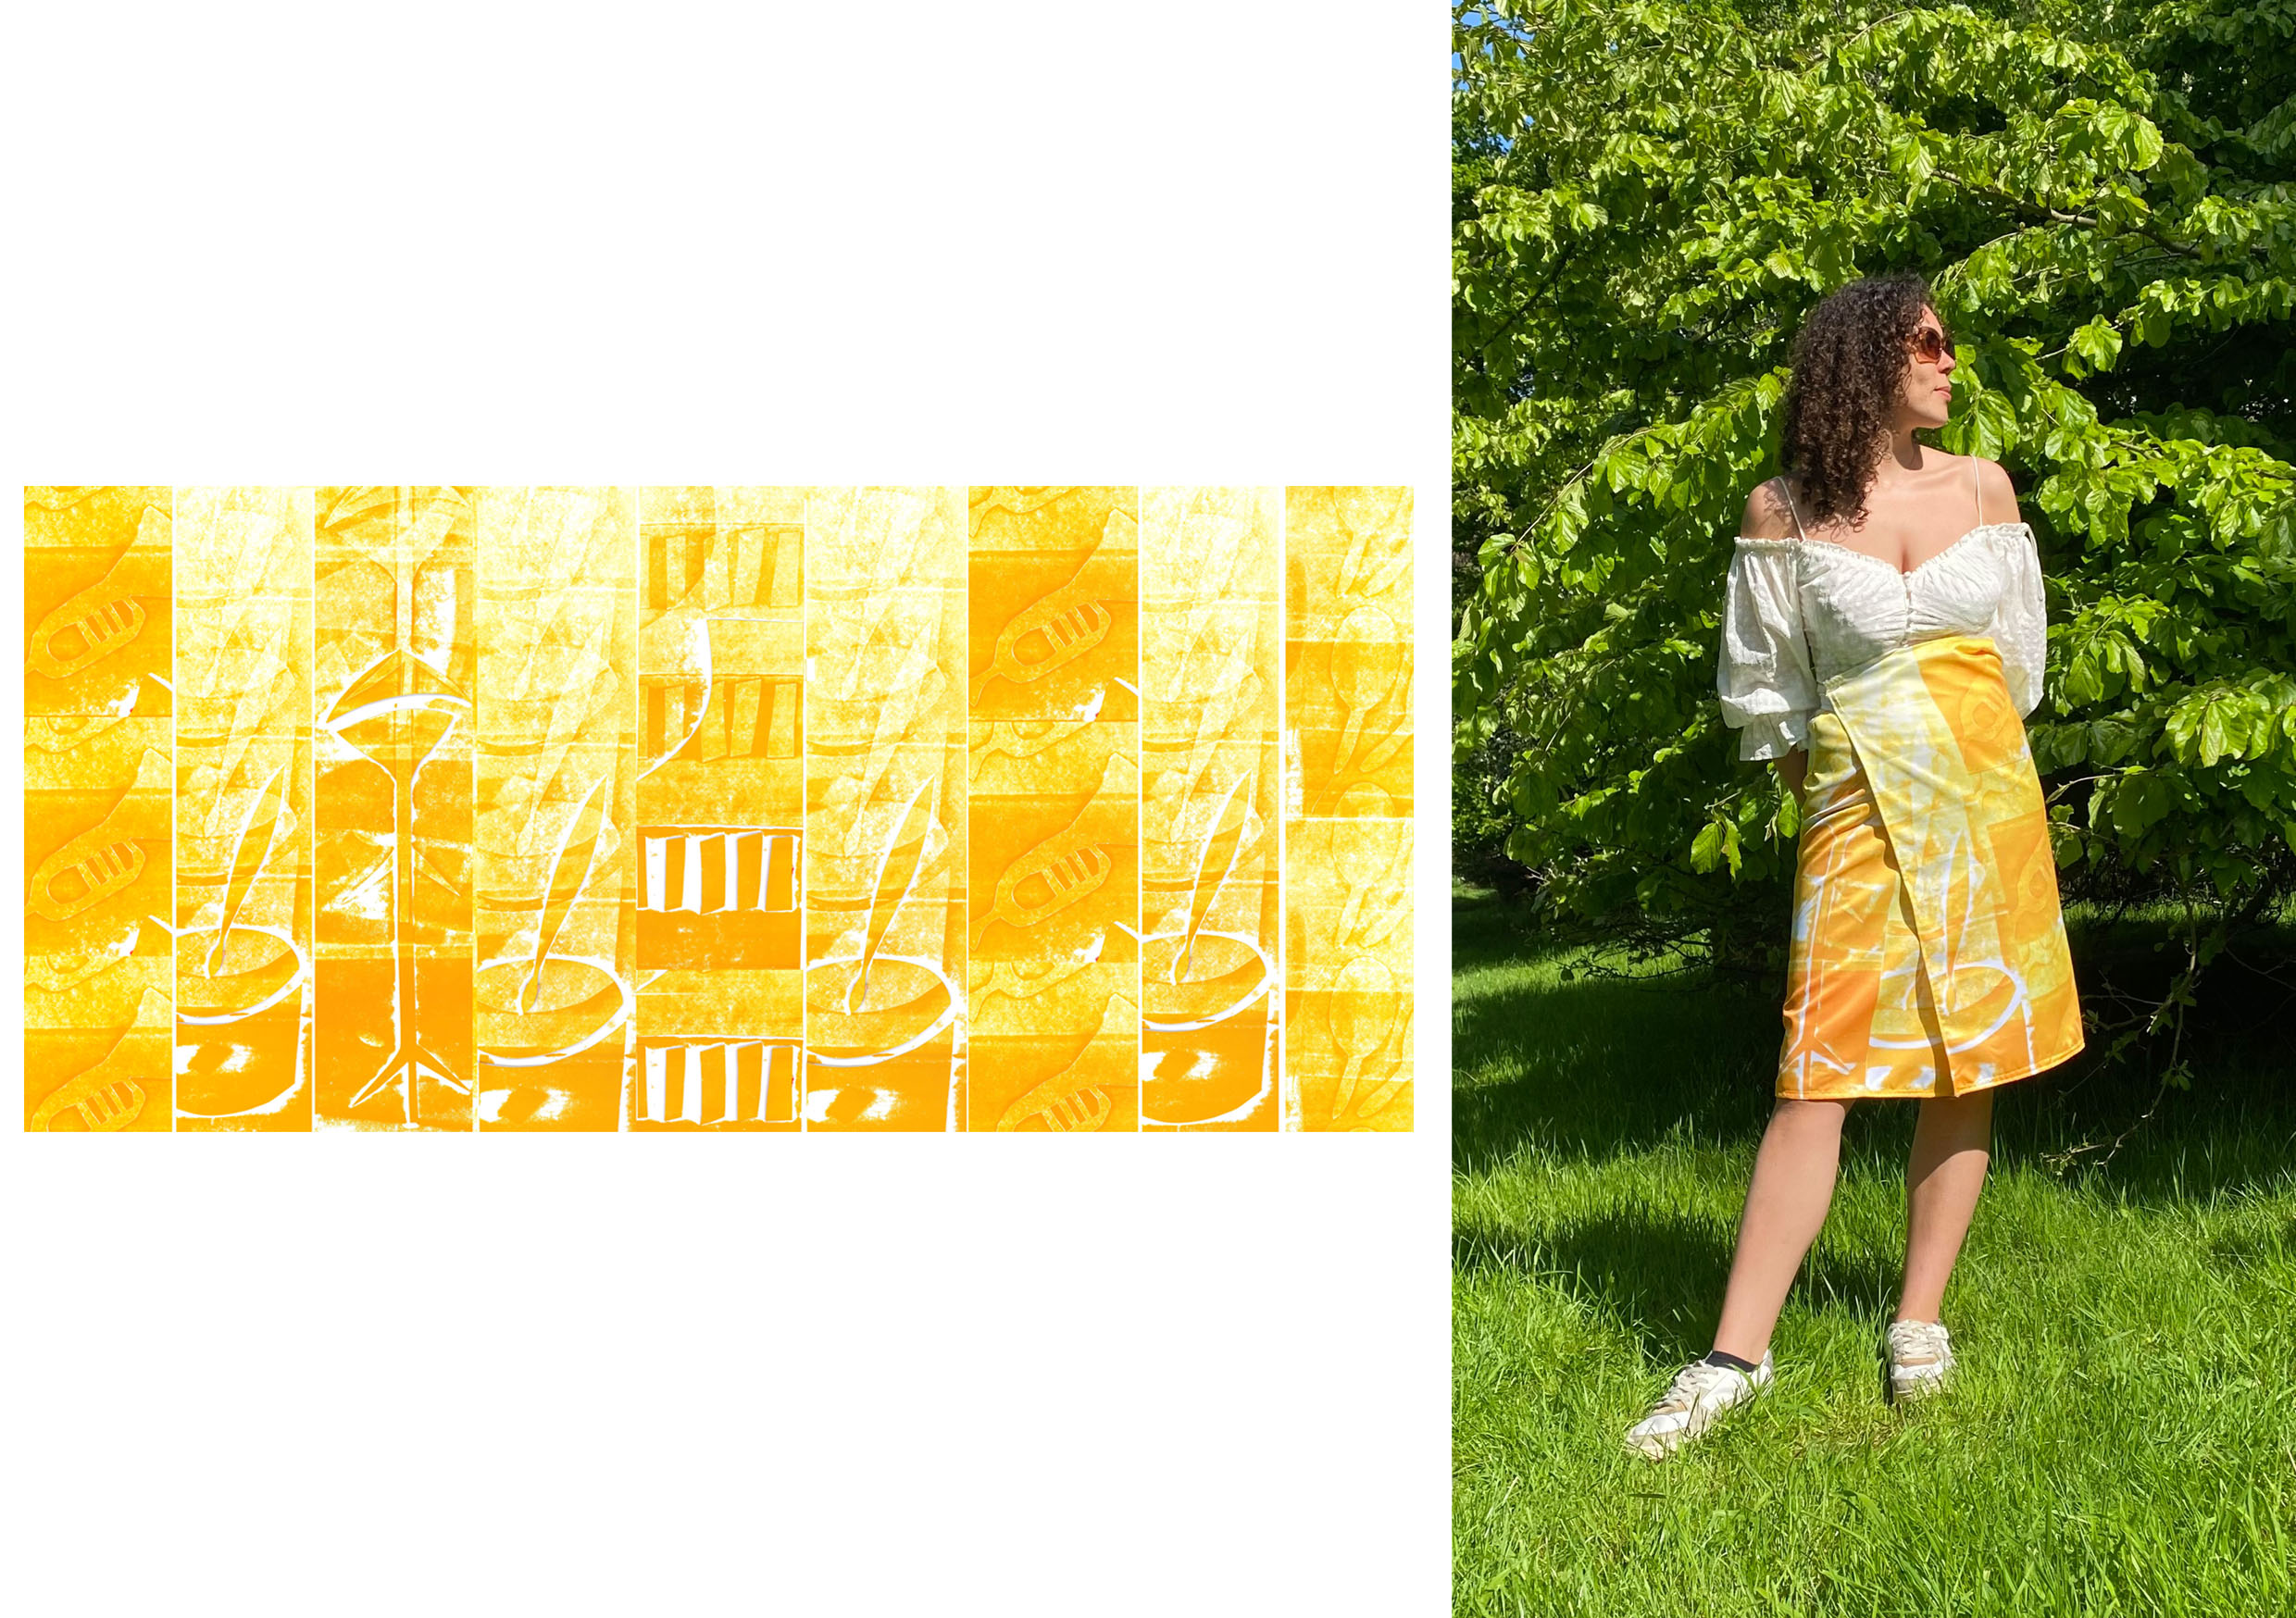 Two images, left displaying a repeated bright yellow pattern and right showing the applied pattern to a skirt.